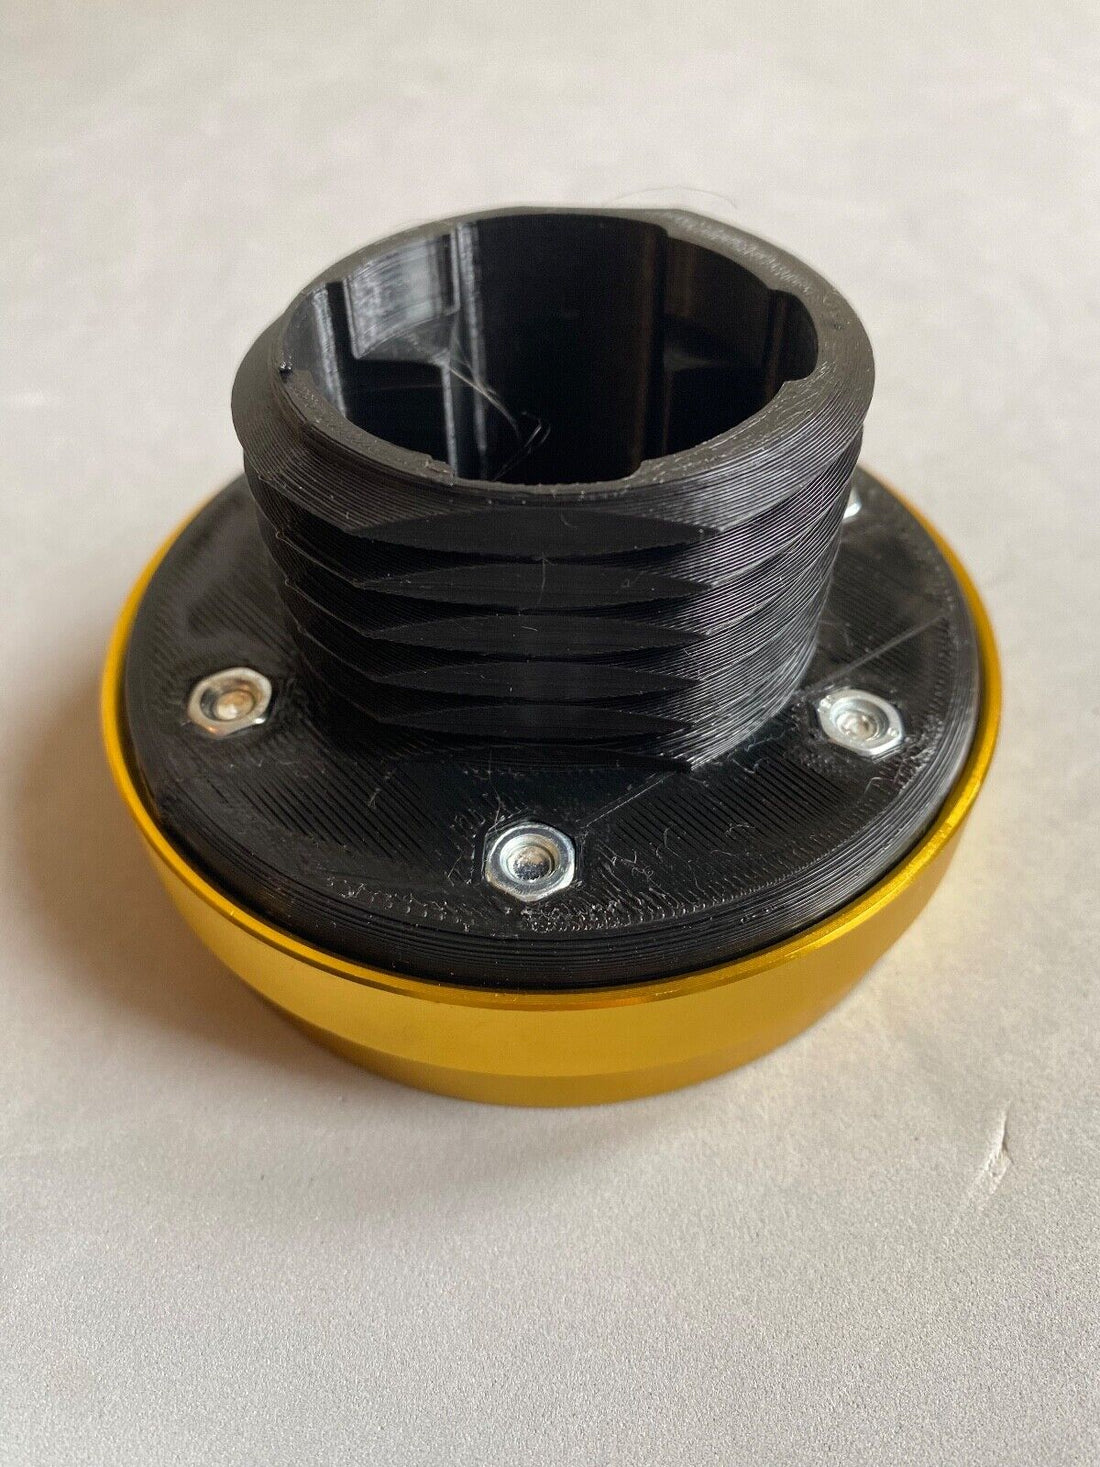 Thrustmaster Quick Release For Thrustmaster Wheels and Servo